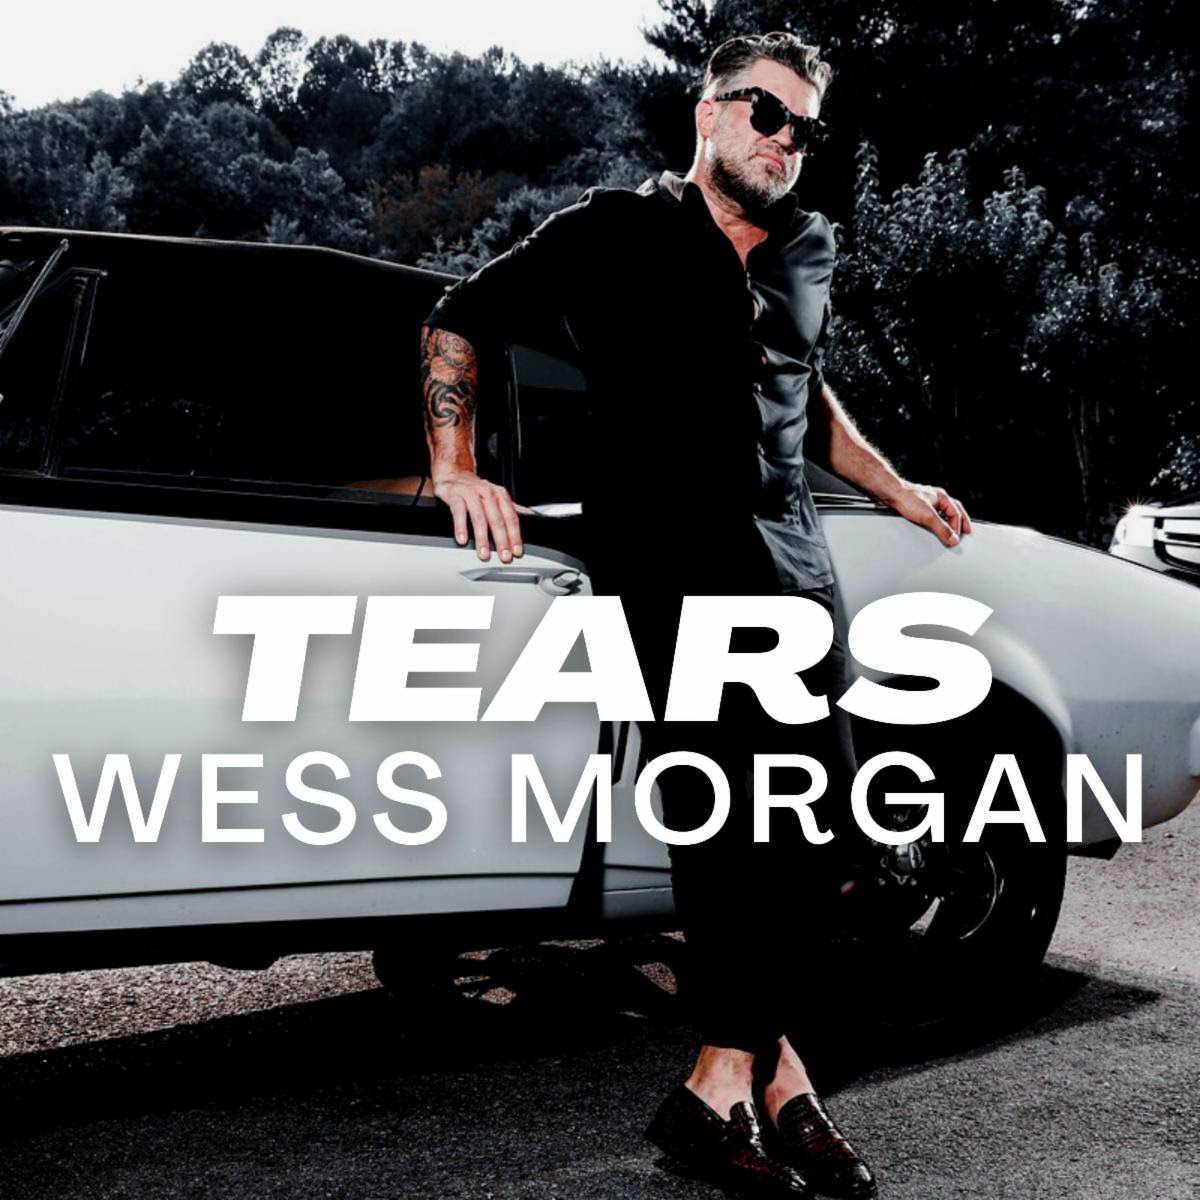 wess-morgan-releases-new-‘tears’-single-and-official-music-video-today